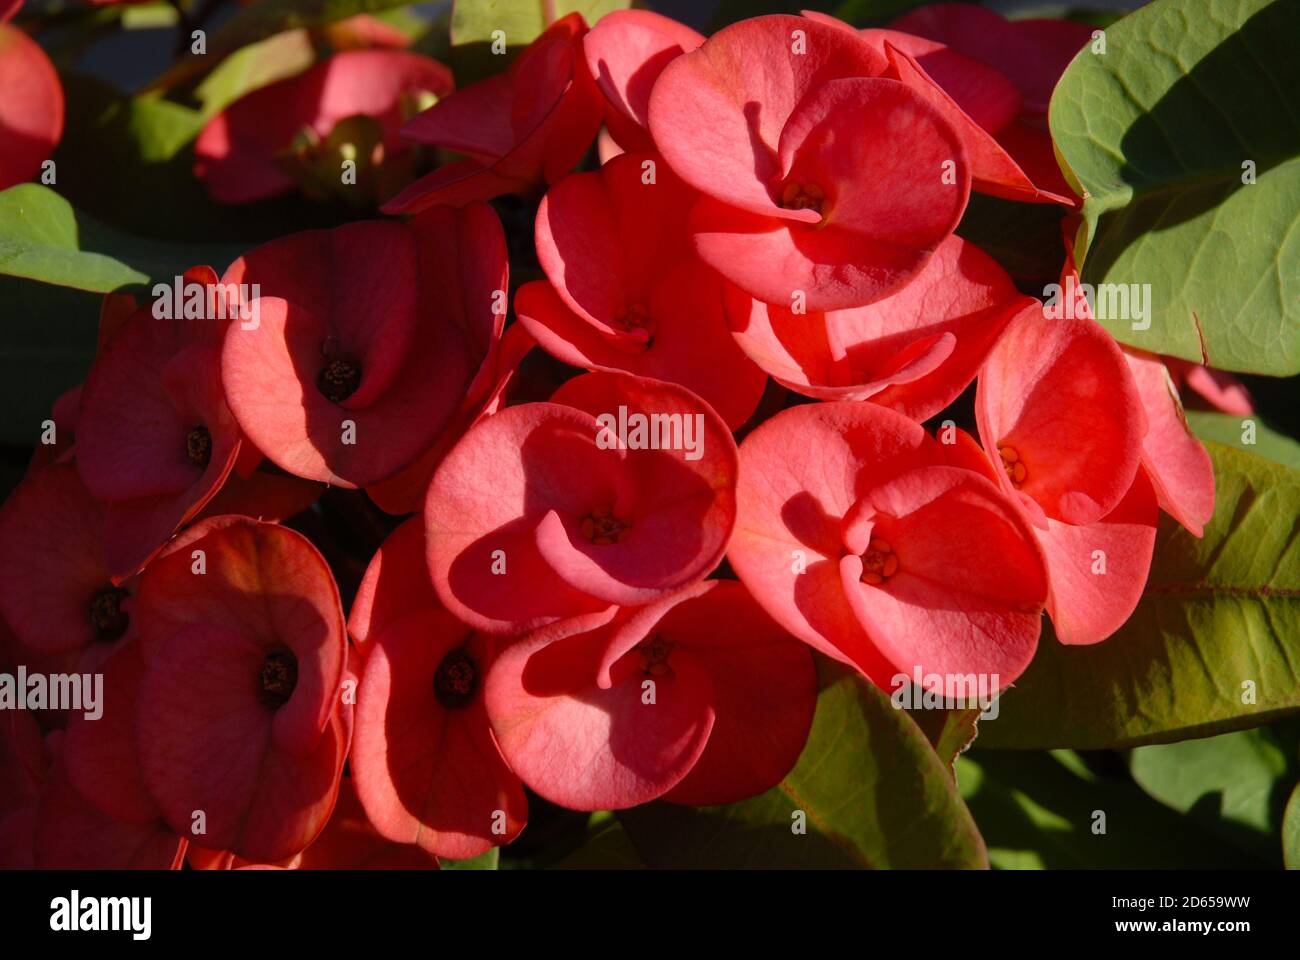 Red flowers of Euphorbia milii, Crown of Thorns Stock Photo